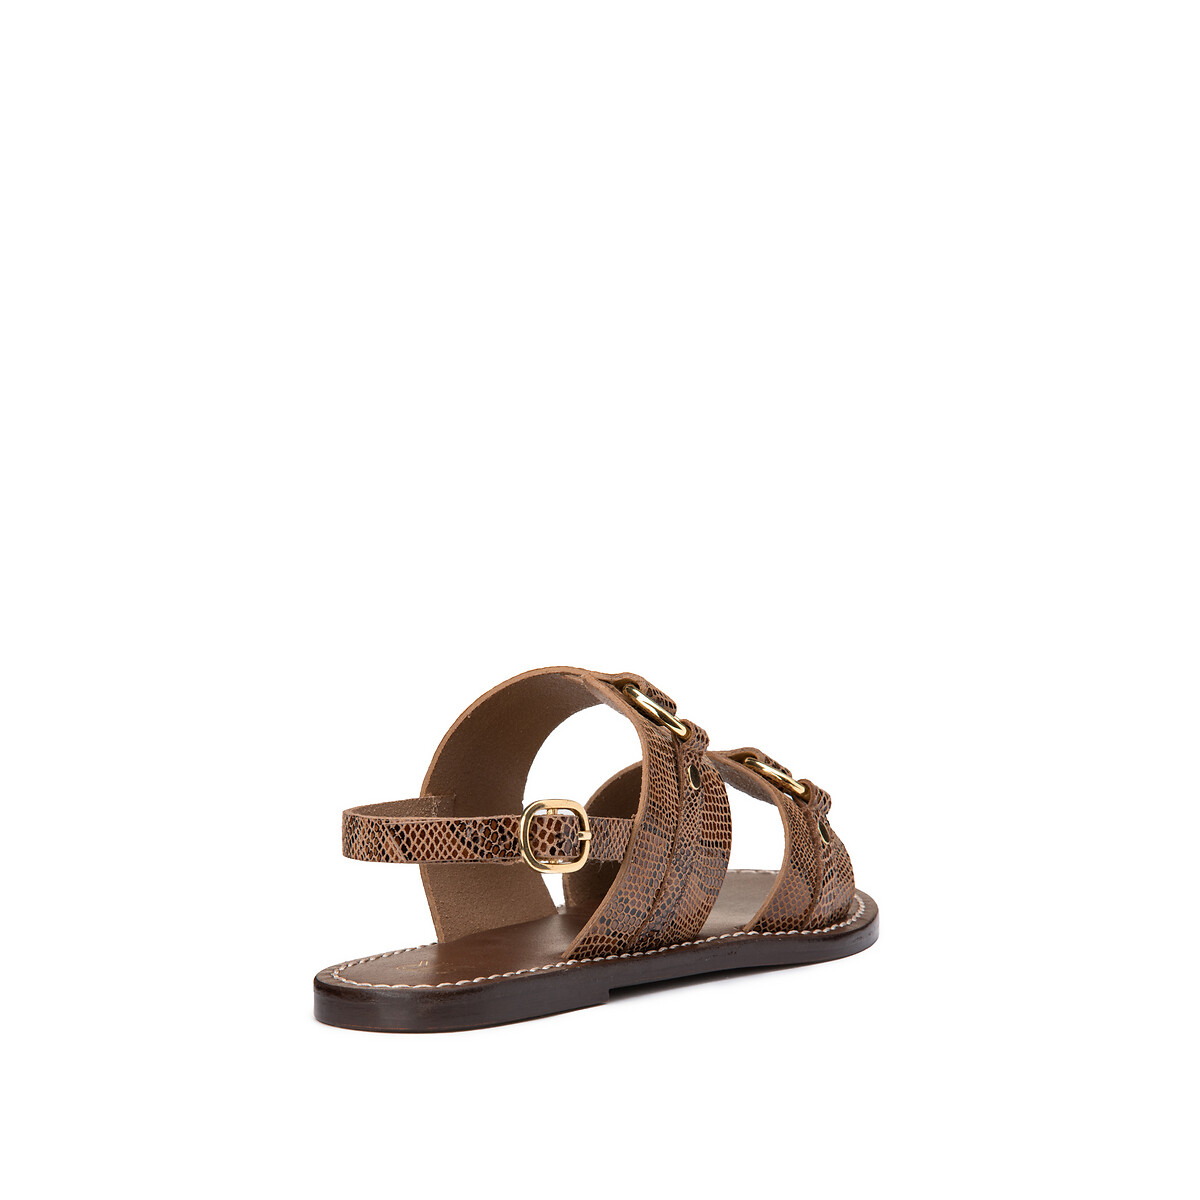 Snake print leather sandals brown La Redoute Collections | La Redoute